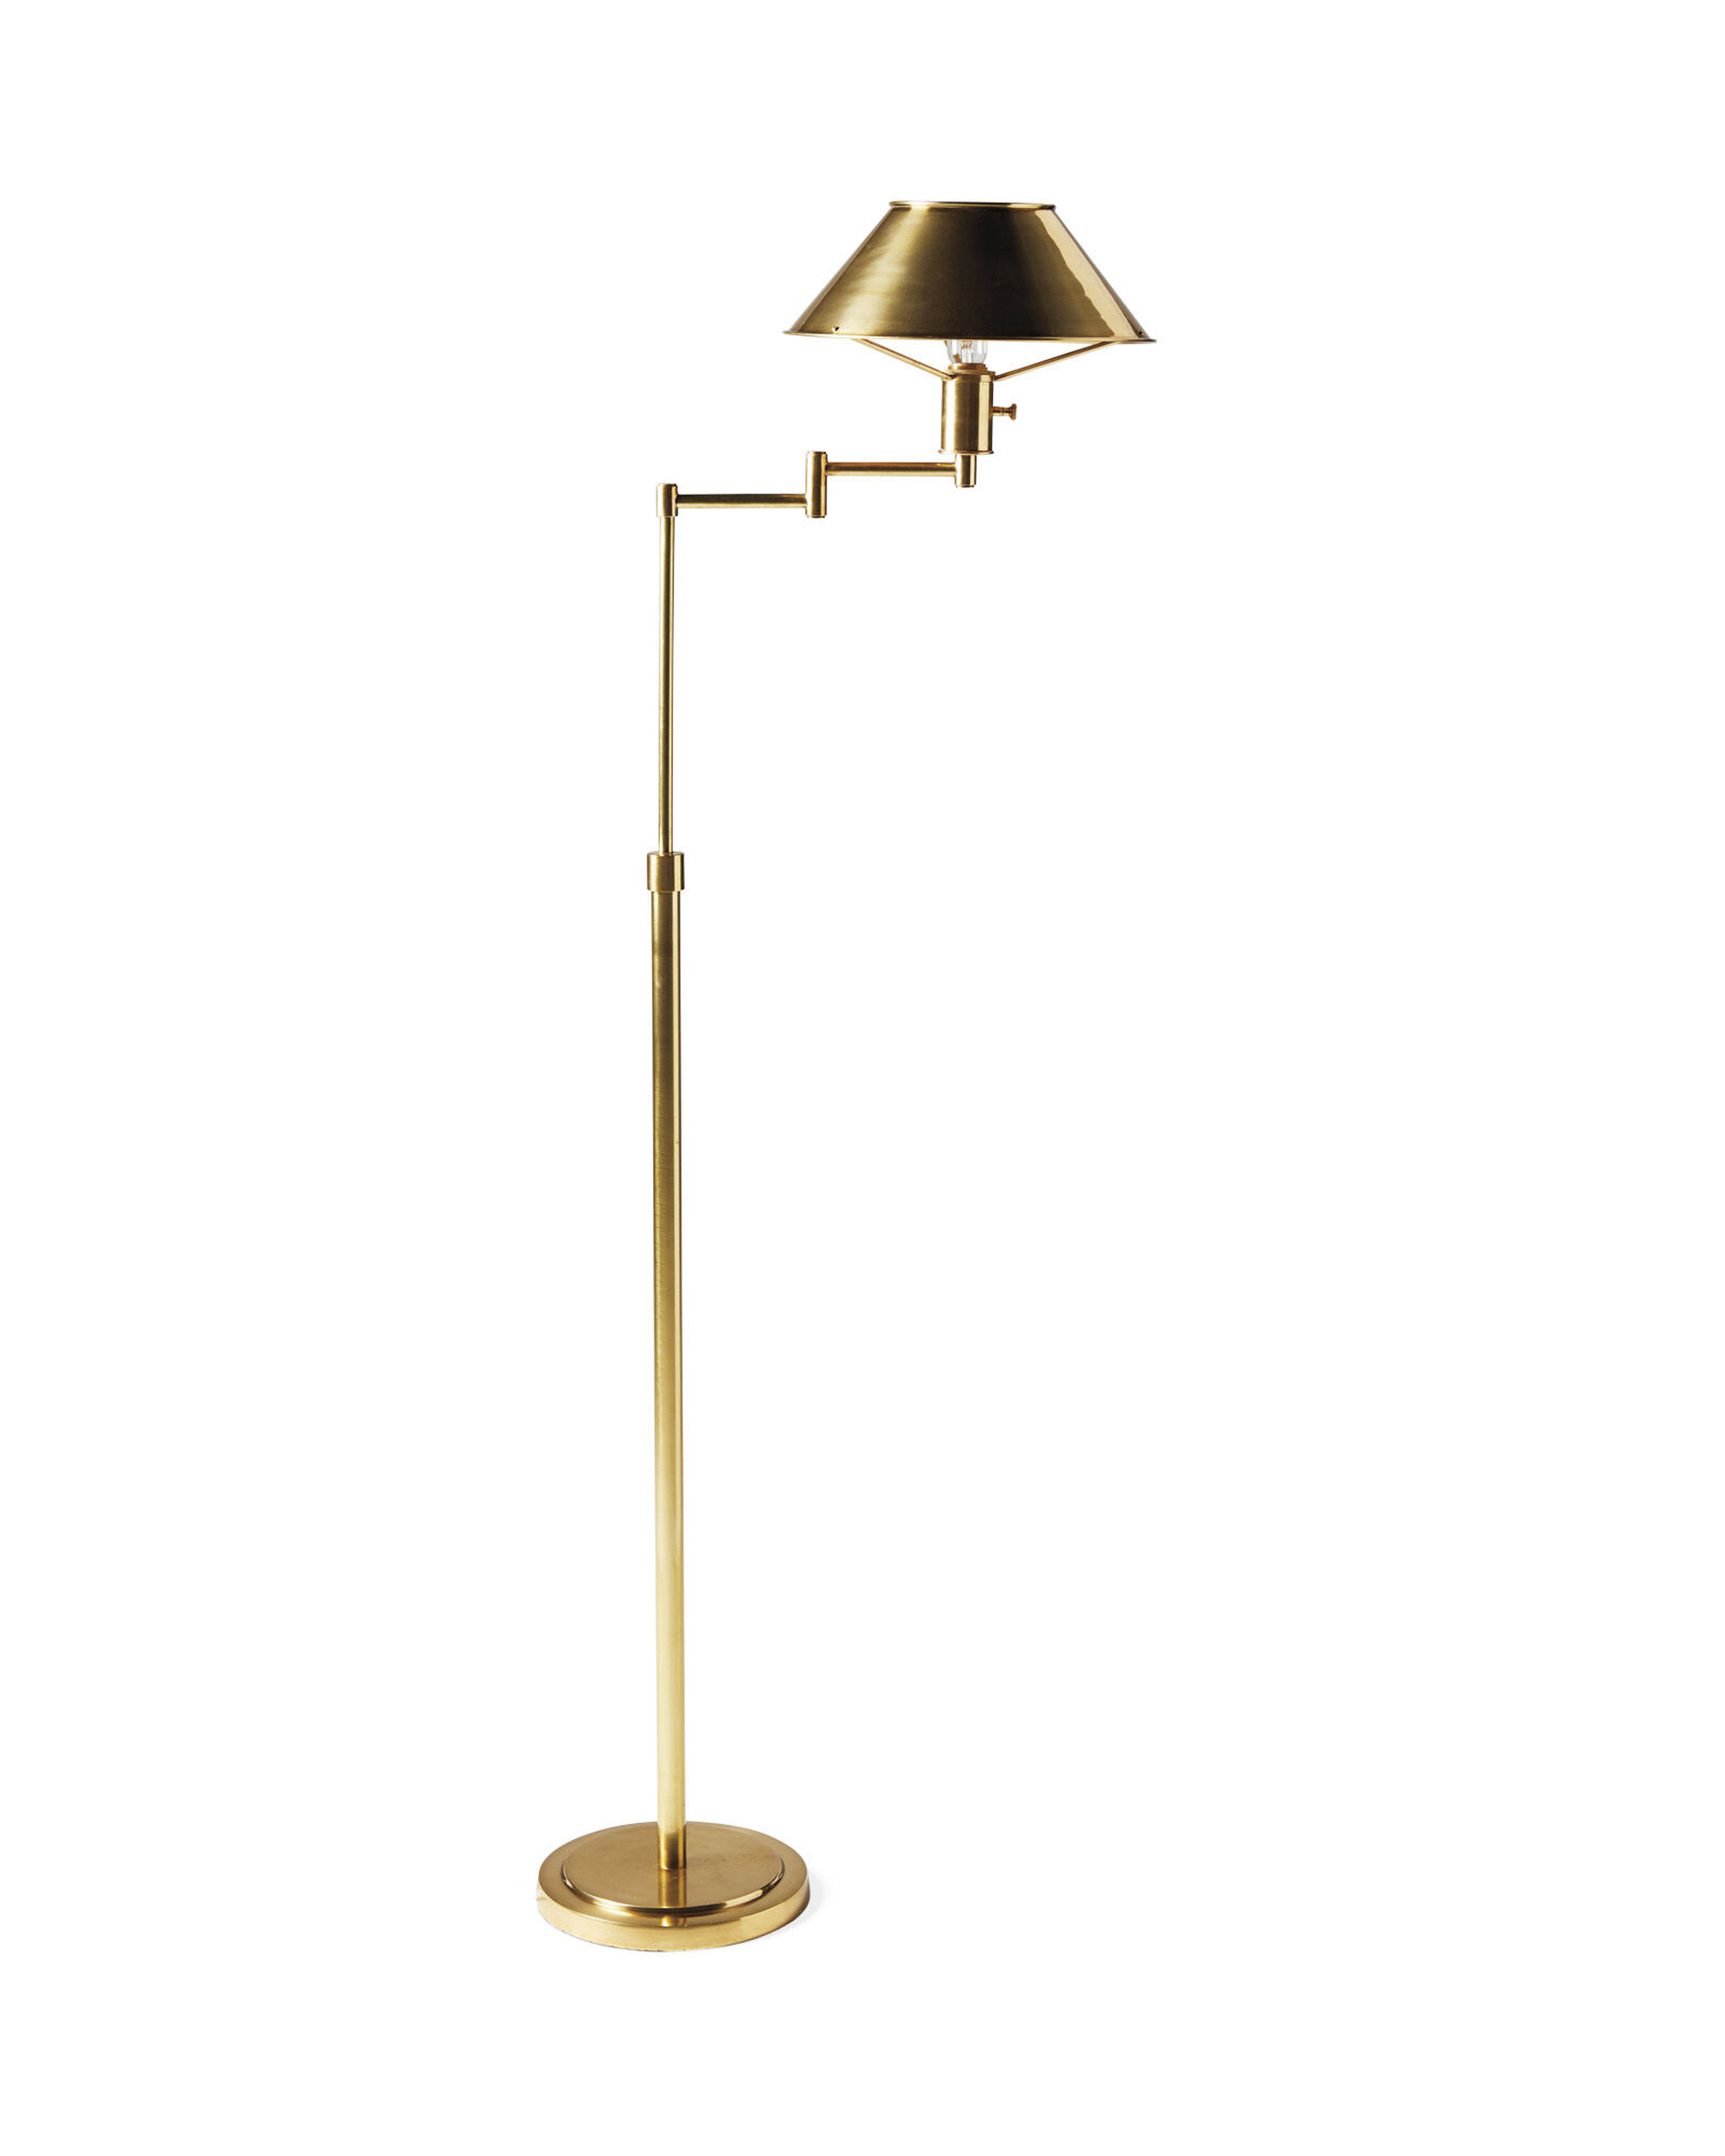 Amherst Swing Arm Floor Lamp - Serena and Lily